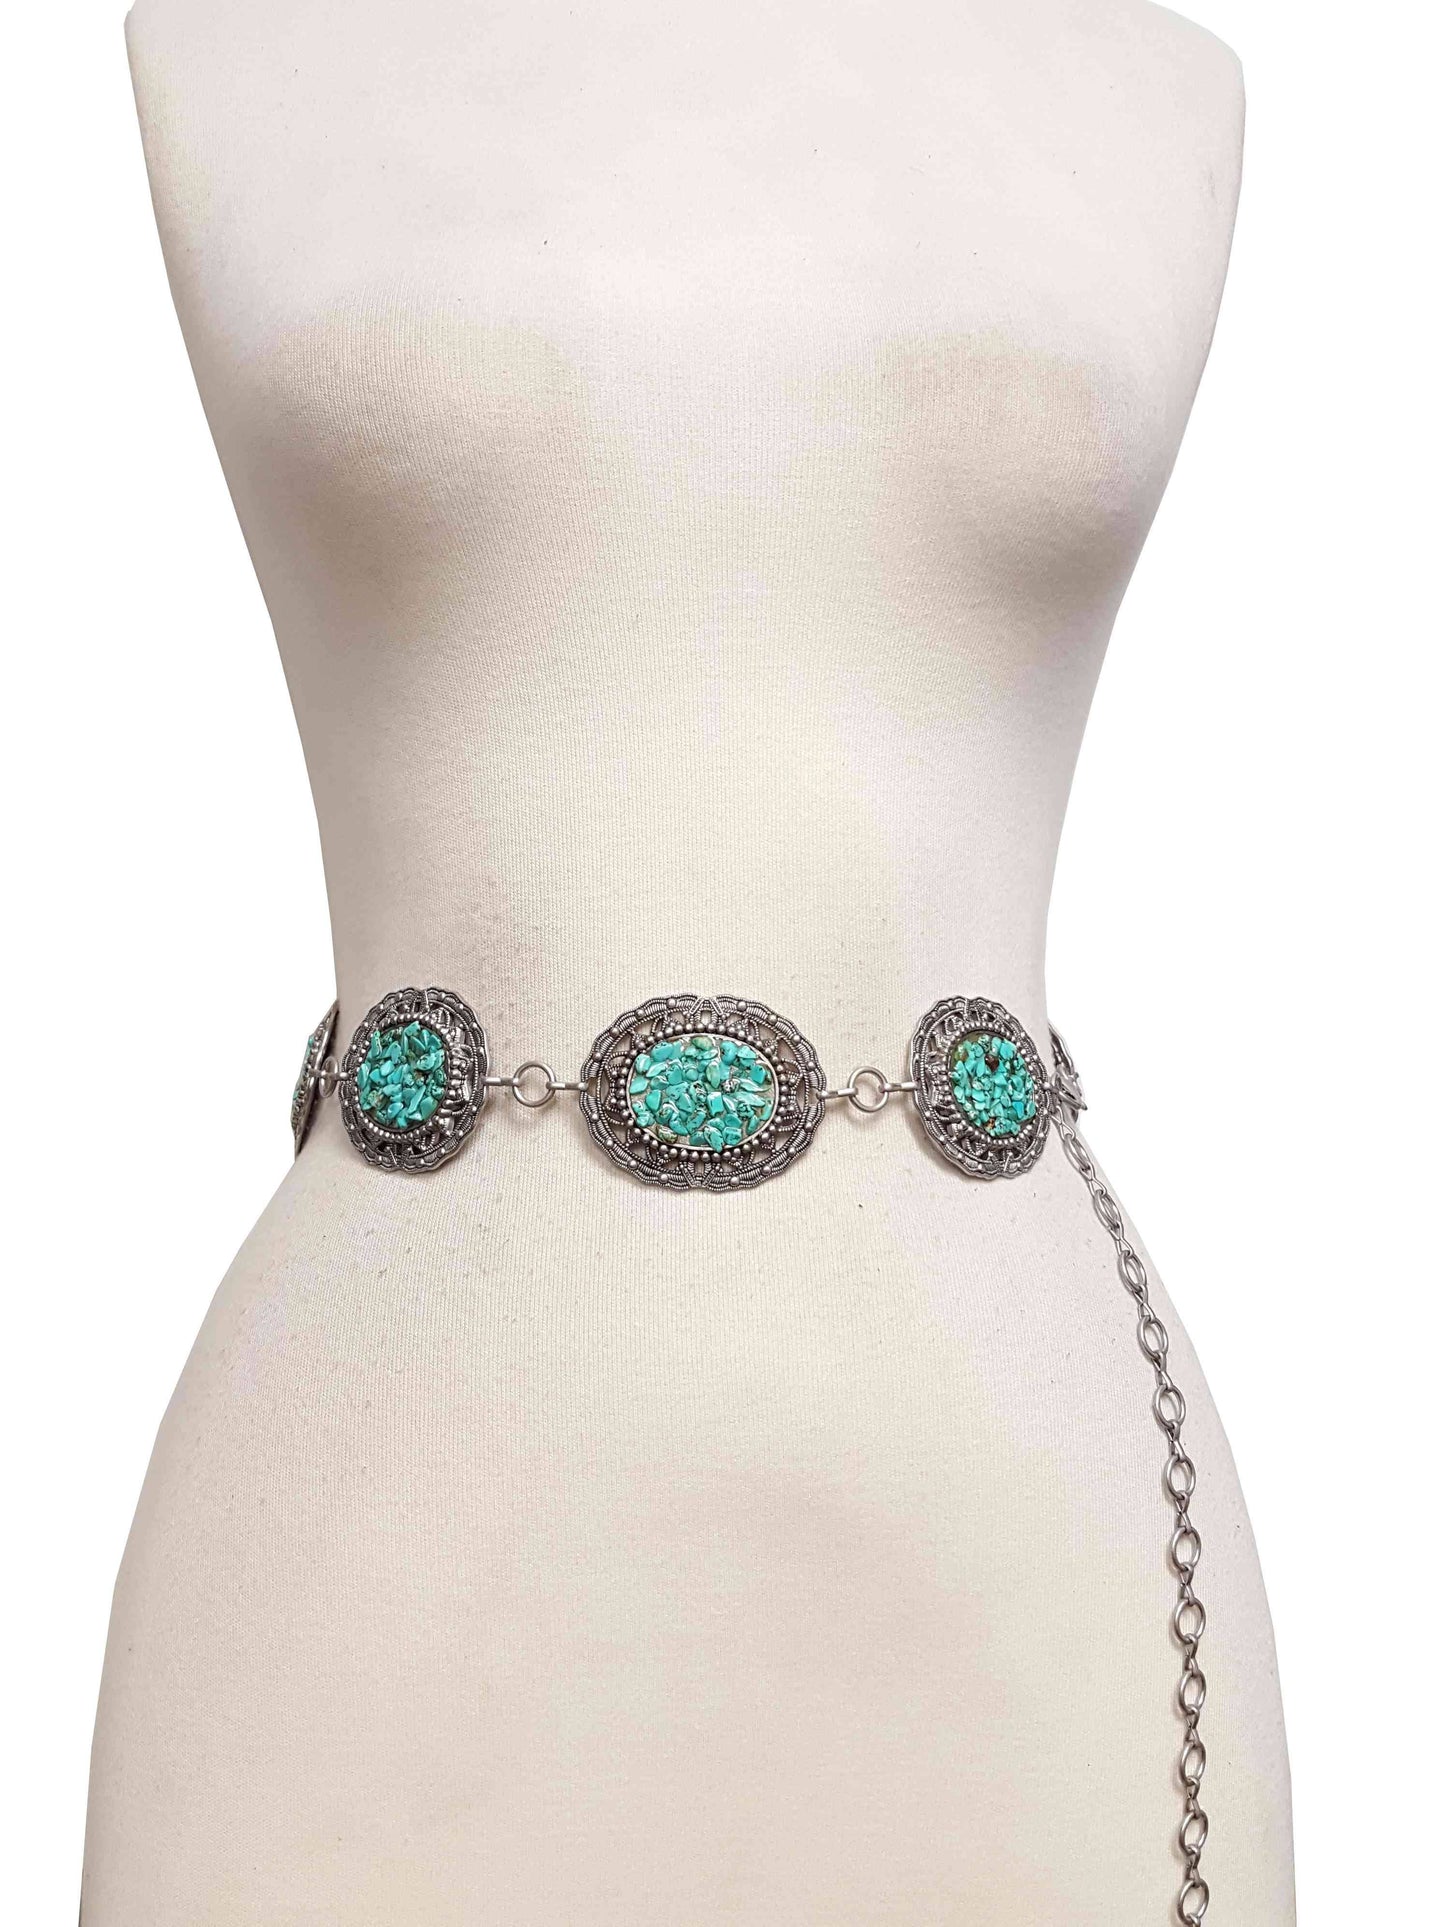 Western Style Silver Chain belt with chip stones